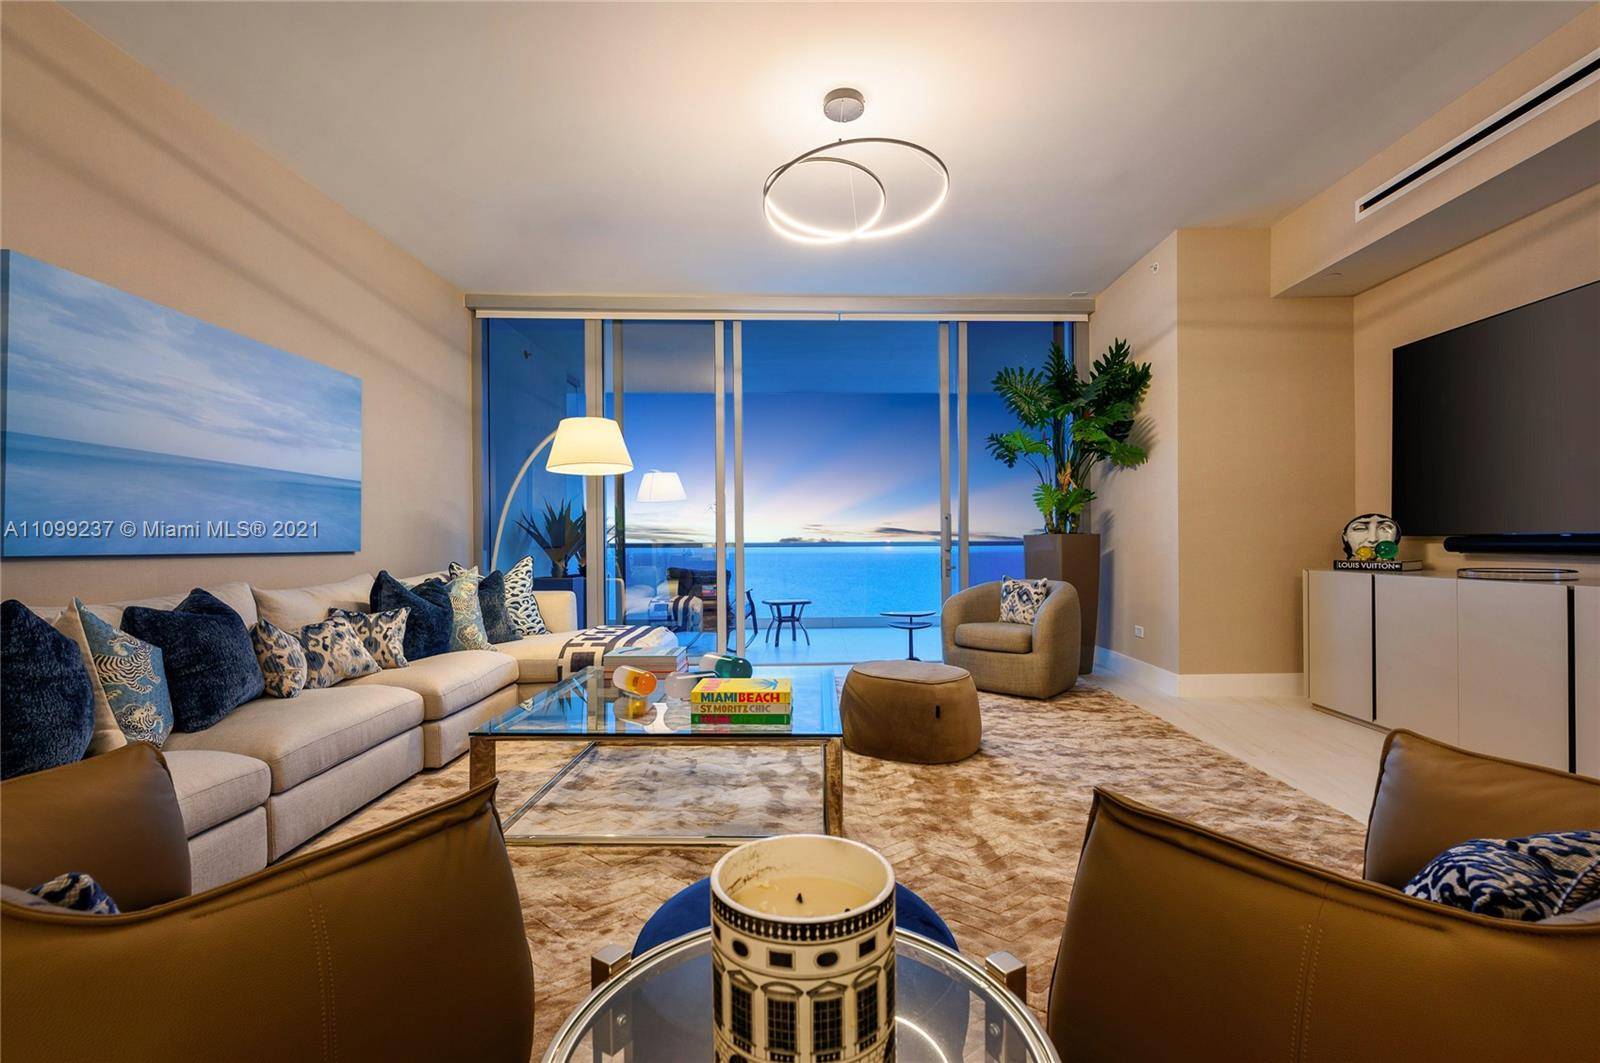 Step into the stunning 3, 760 SF turnkey unit 3403 at the coveted Turnberry Ocean Club in Sunny Isles, with over 70k SF of amenities on six dedicated levels.